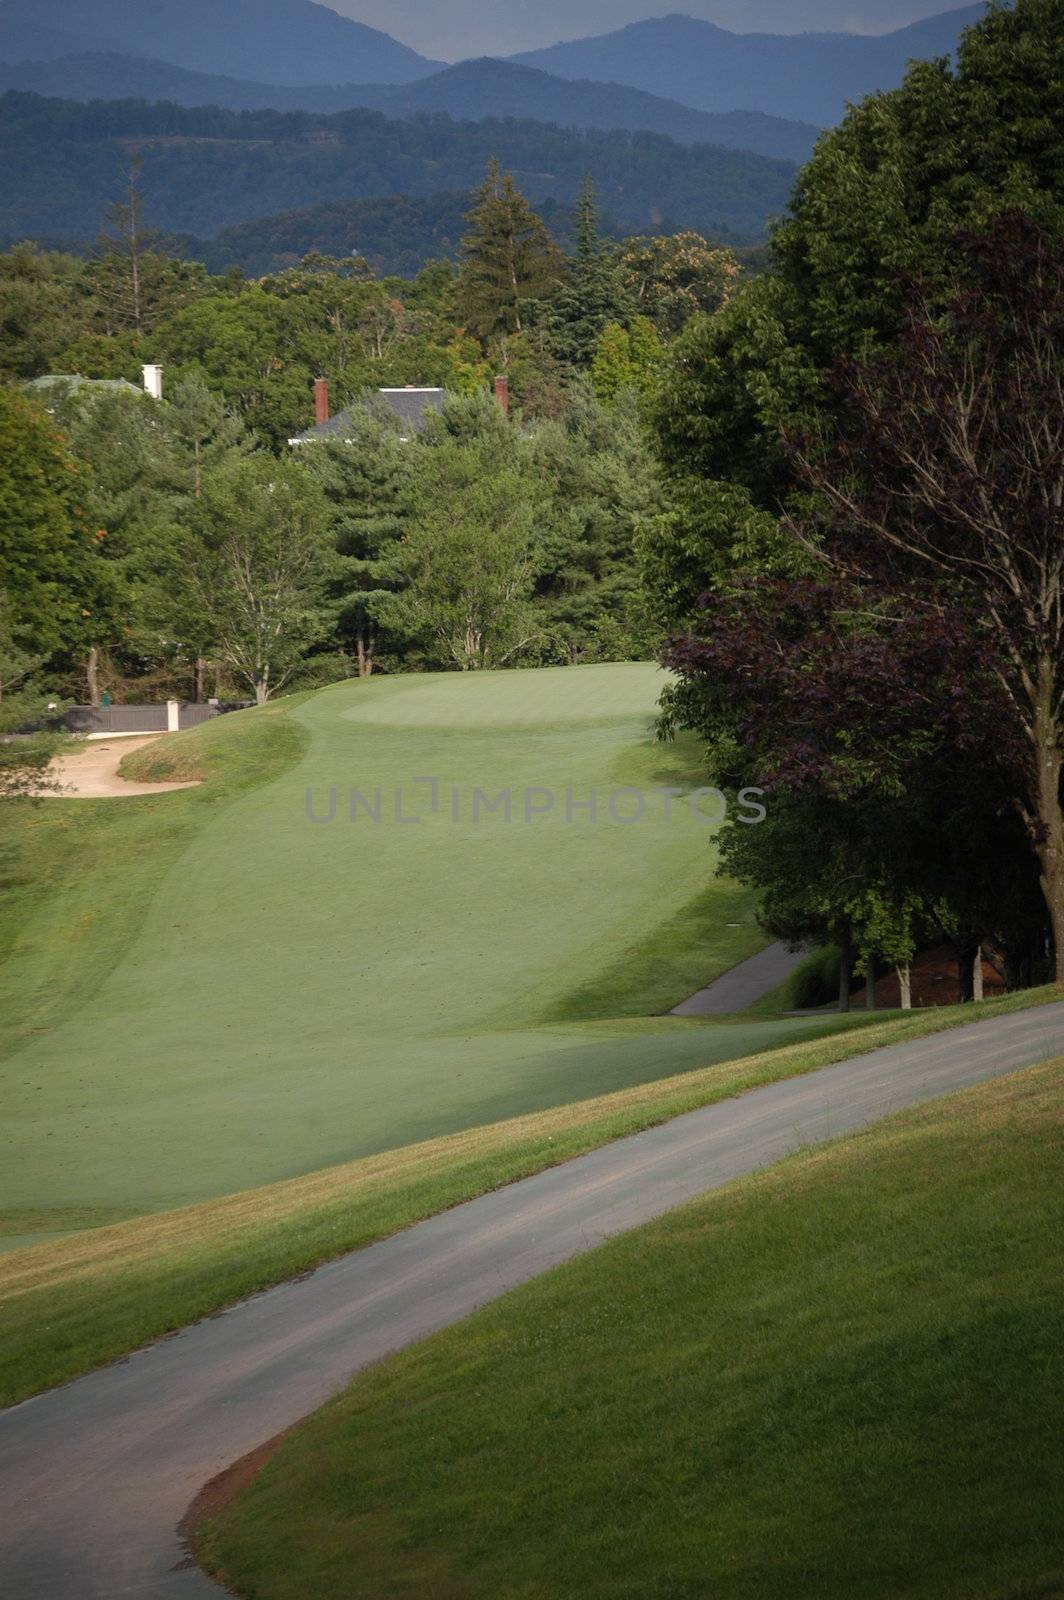 A long golf green in the North Carolina mountains